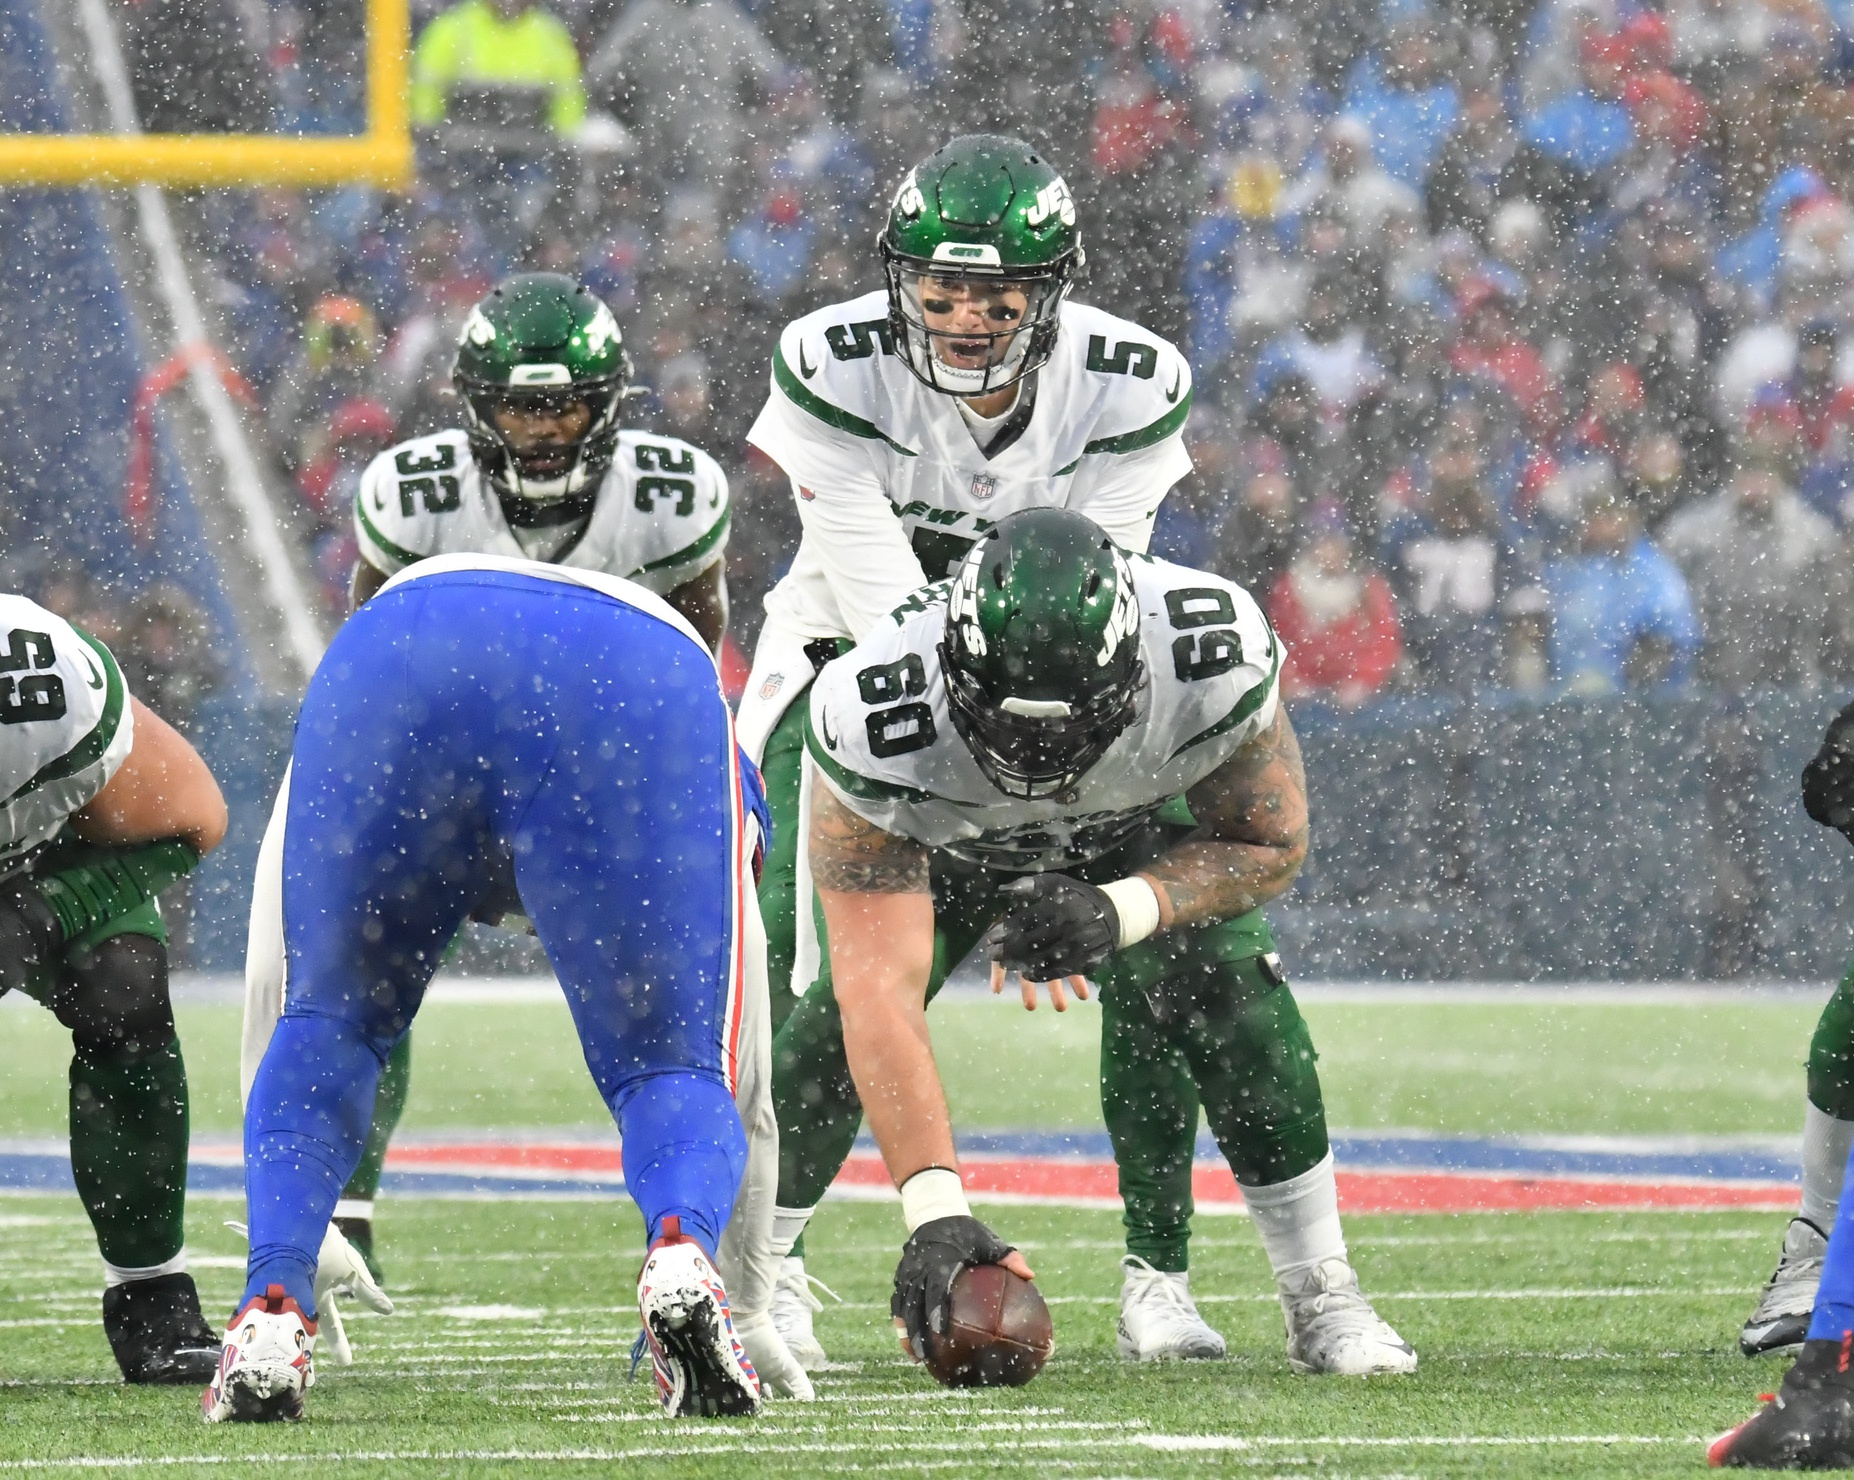 Mike White (5) and center Connor McGovern (60) prepare to snap the ball against the Buffalo Bills in the fourth quarter at Highmark Stadium.